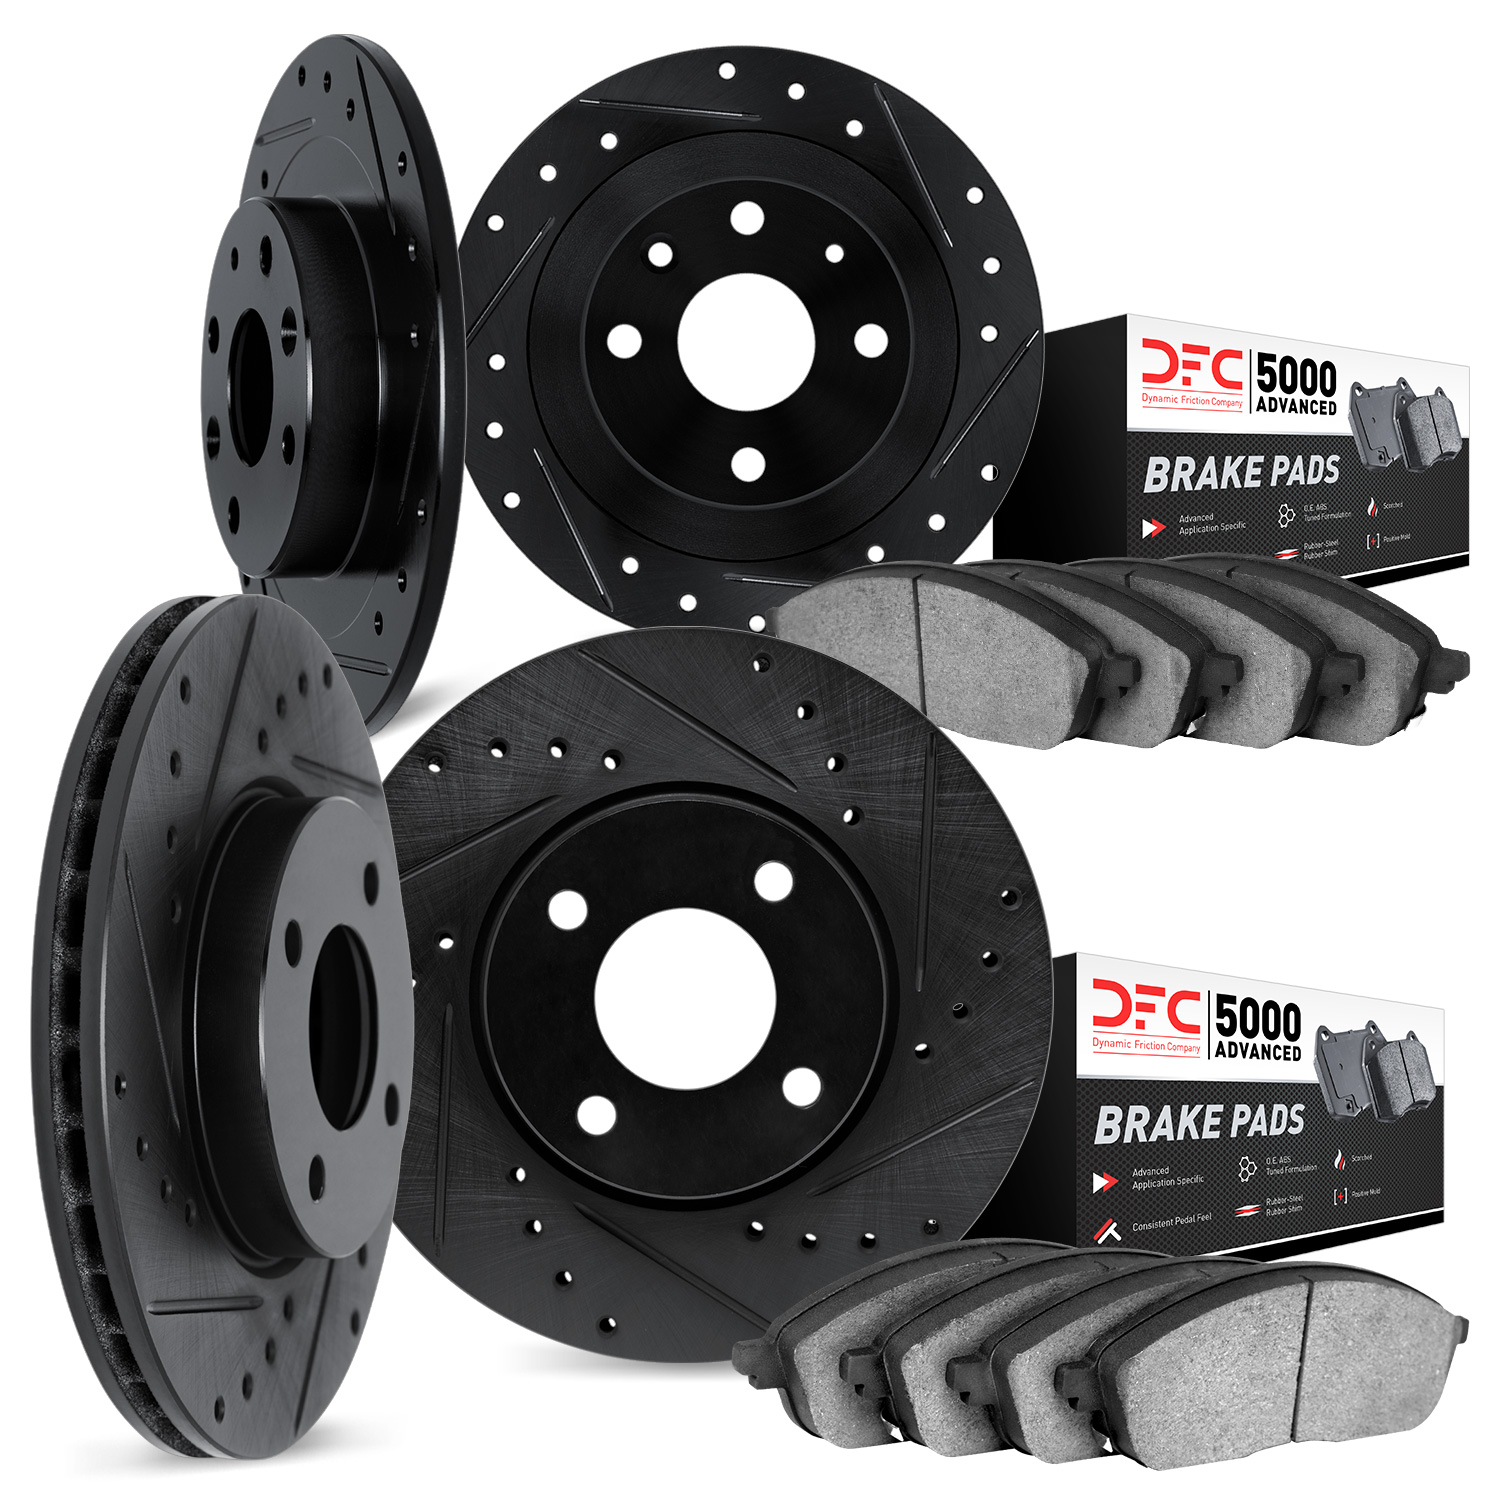 8504-76111 Drilled/Slotted Brake Rotors w/5000 Advanced Brake Pads Kit [Black], 1985-1987 Lexus/Toyota/Scion, Position: Front an